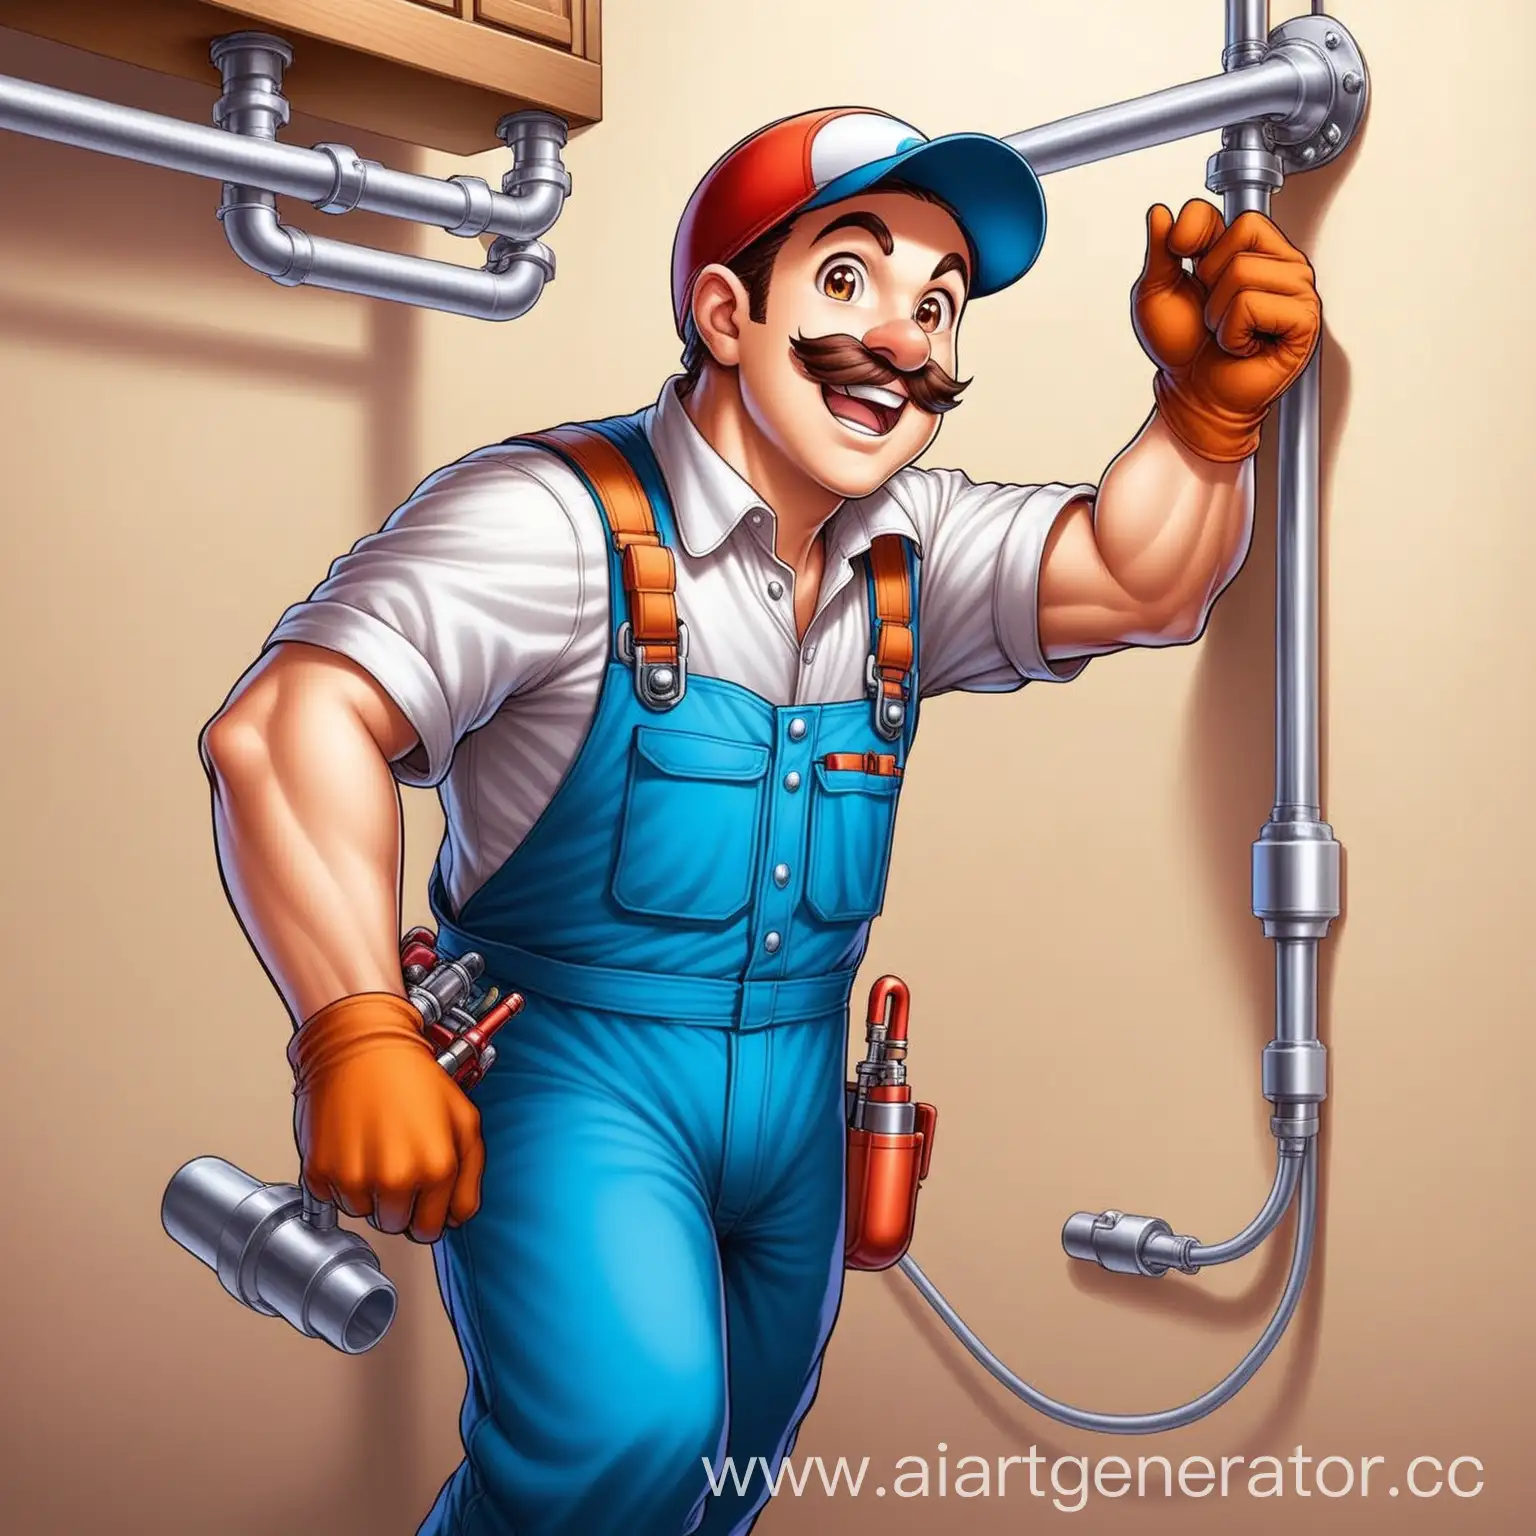 Plumber-and-Electrician-Working-Together-on-Home-Renovation-Project